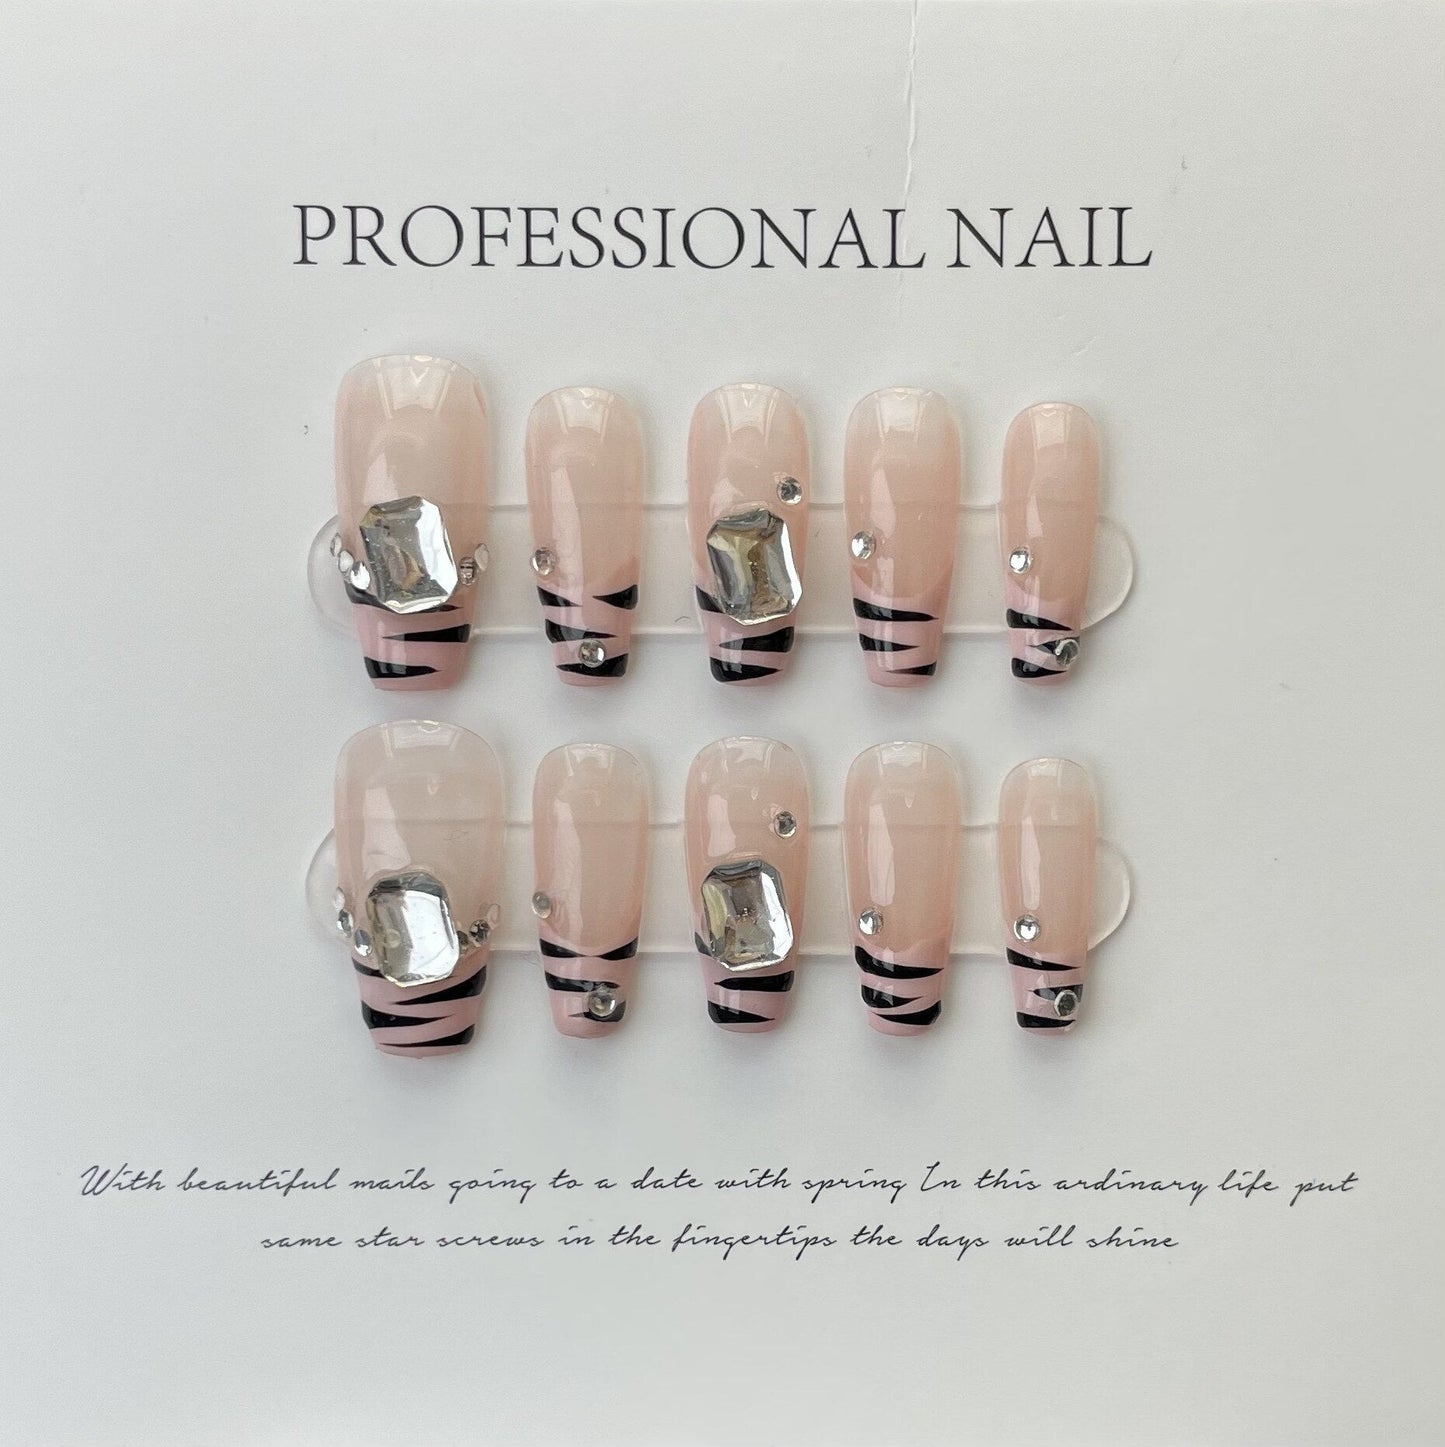 361-375 Number Silver Powder Camellia Handmade Fake Nails Professional Wearable Advanced Ballet Press On Nails With Rhinestones